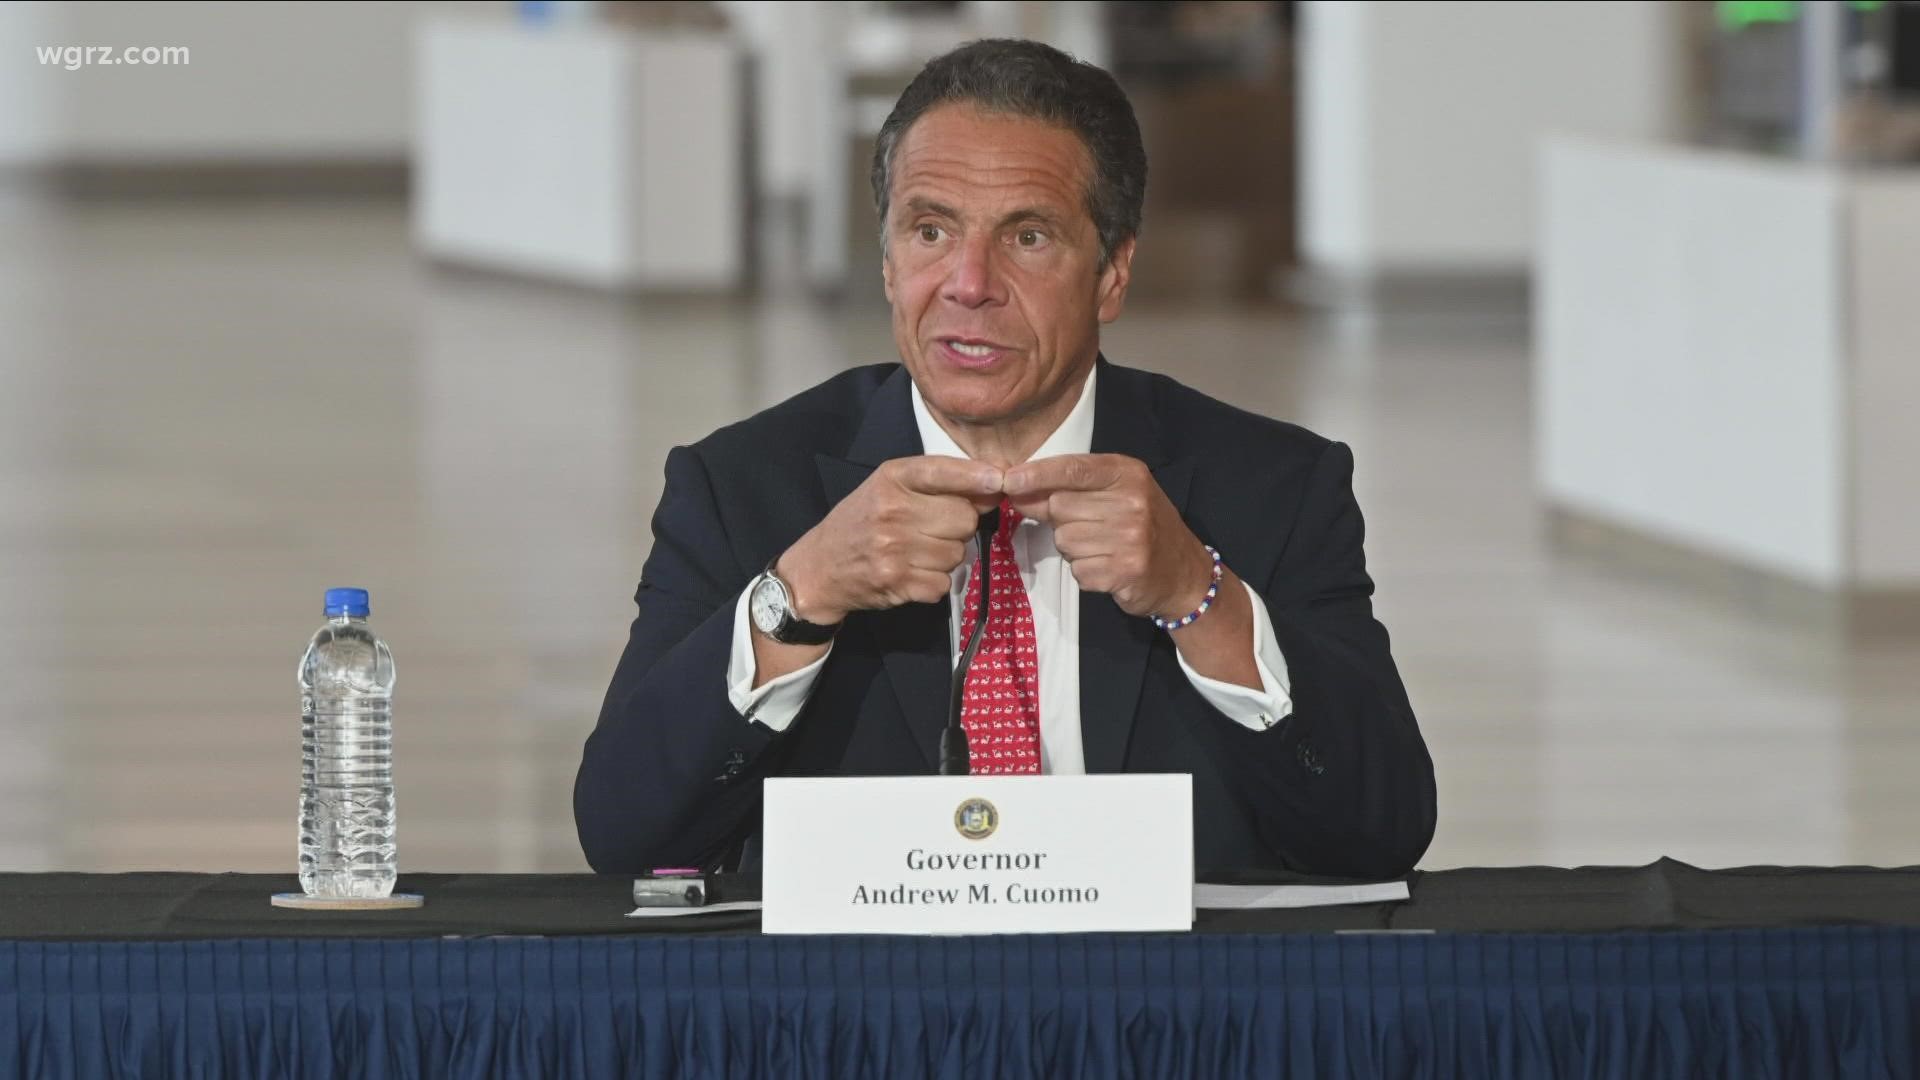 Andrew Cuomo clean legal slate